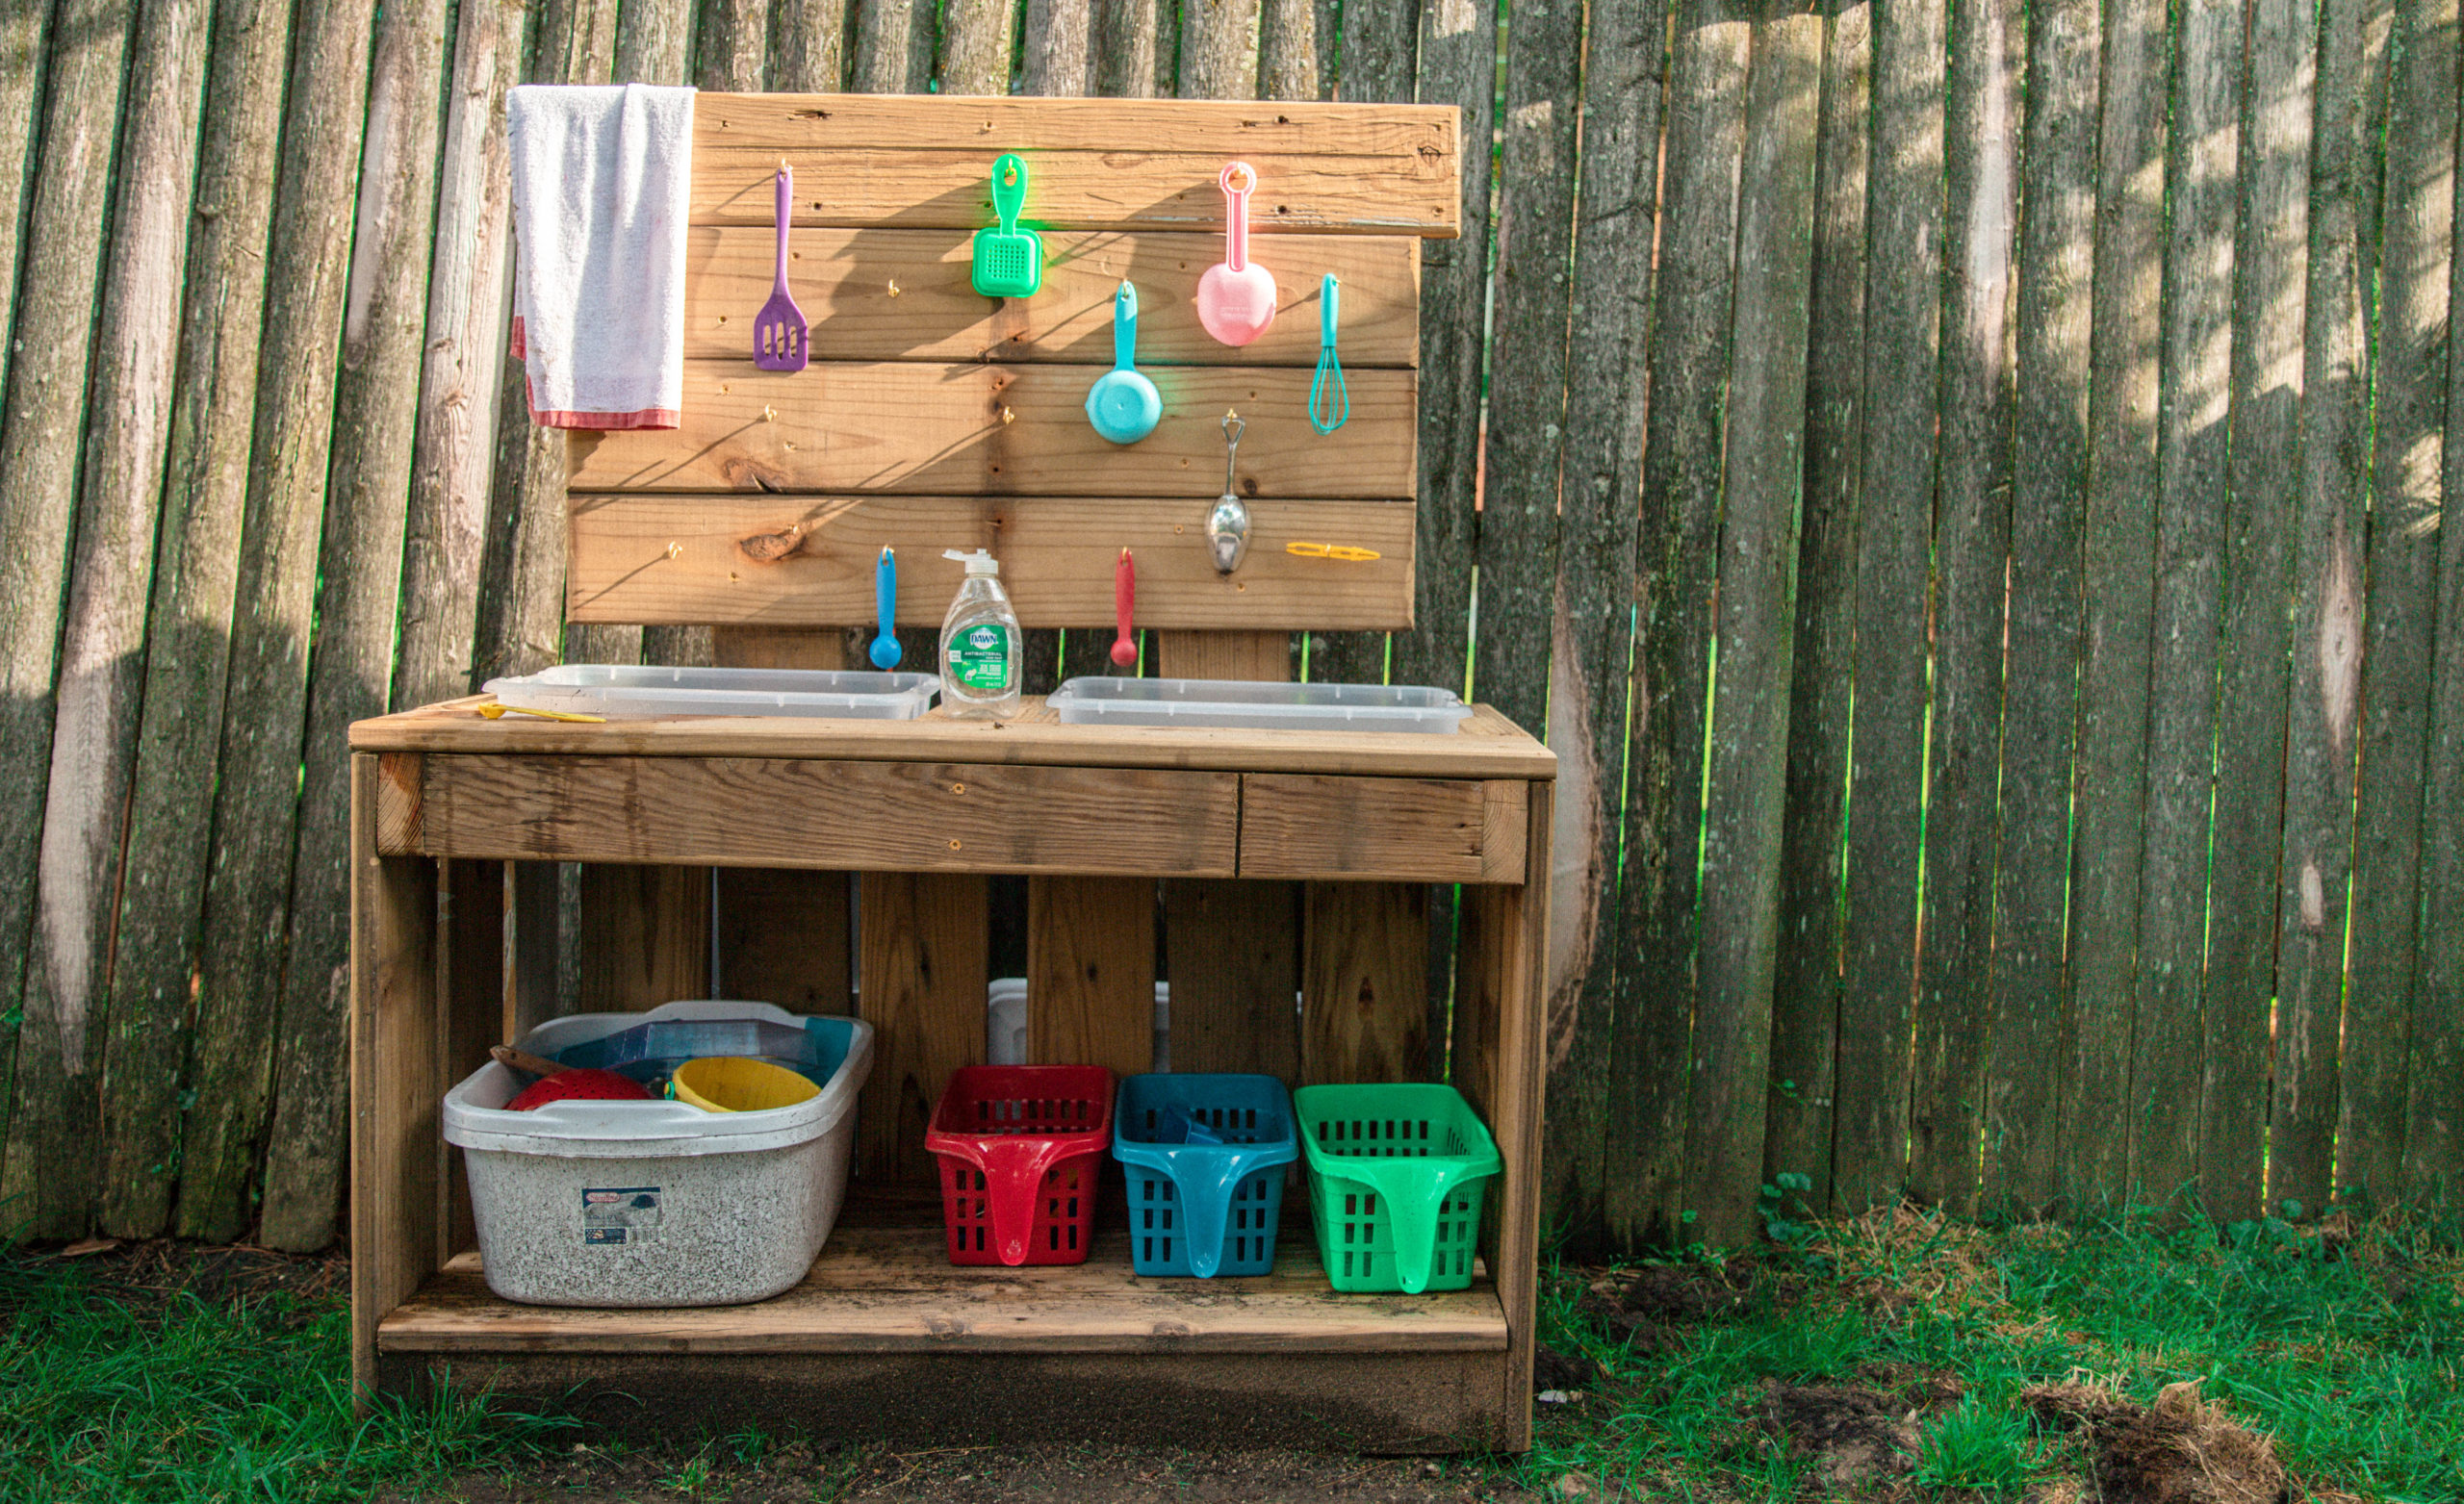 5 Steps for Building the Ultimate DIY Mud Kitchen